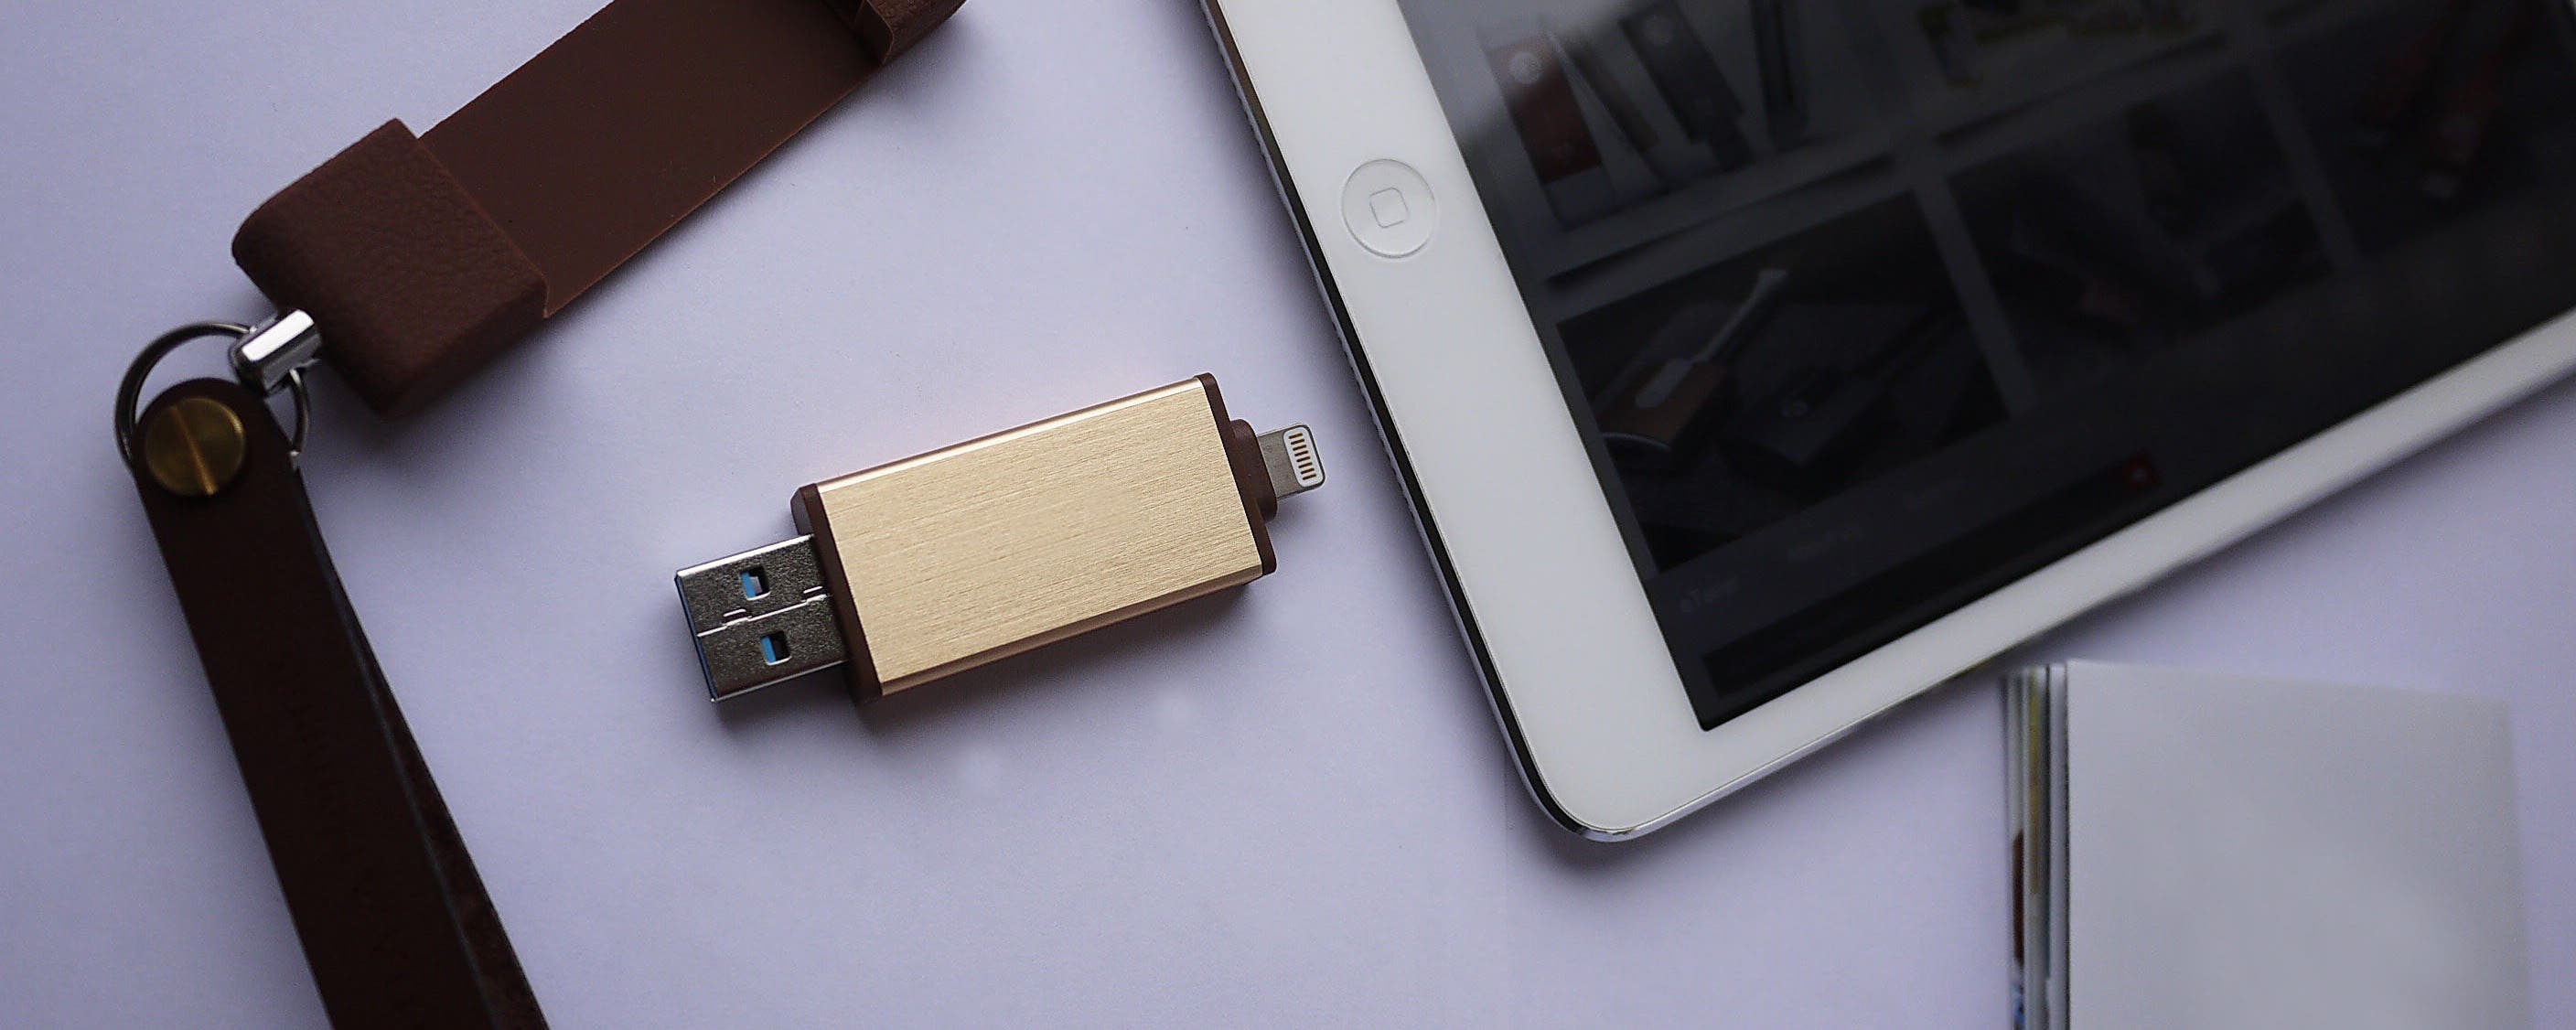 How to Use a USB Drive with an iPhone or iPad